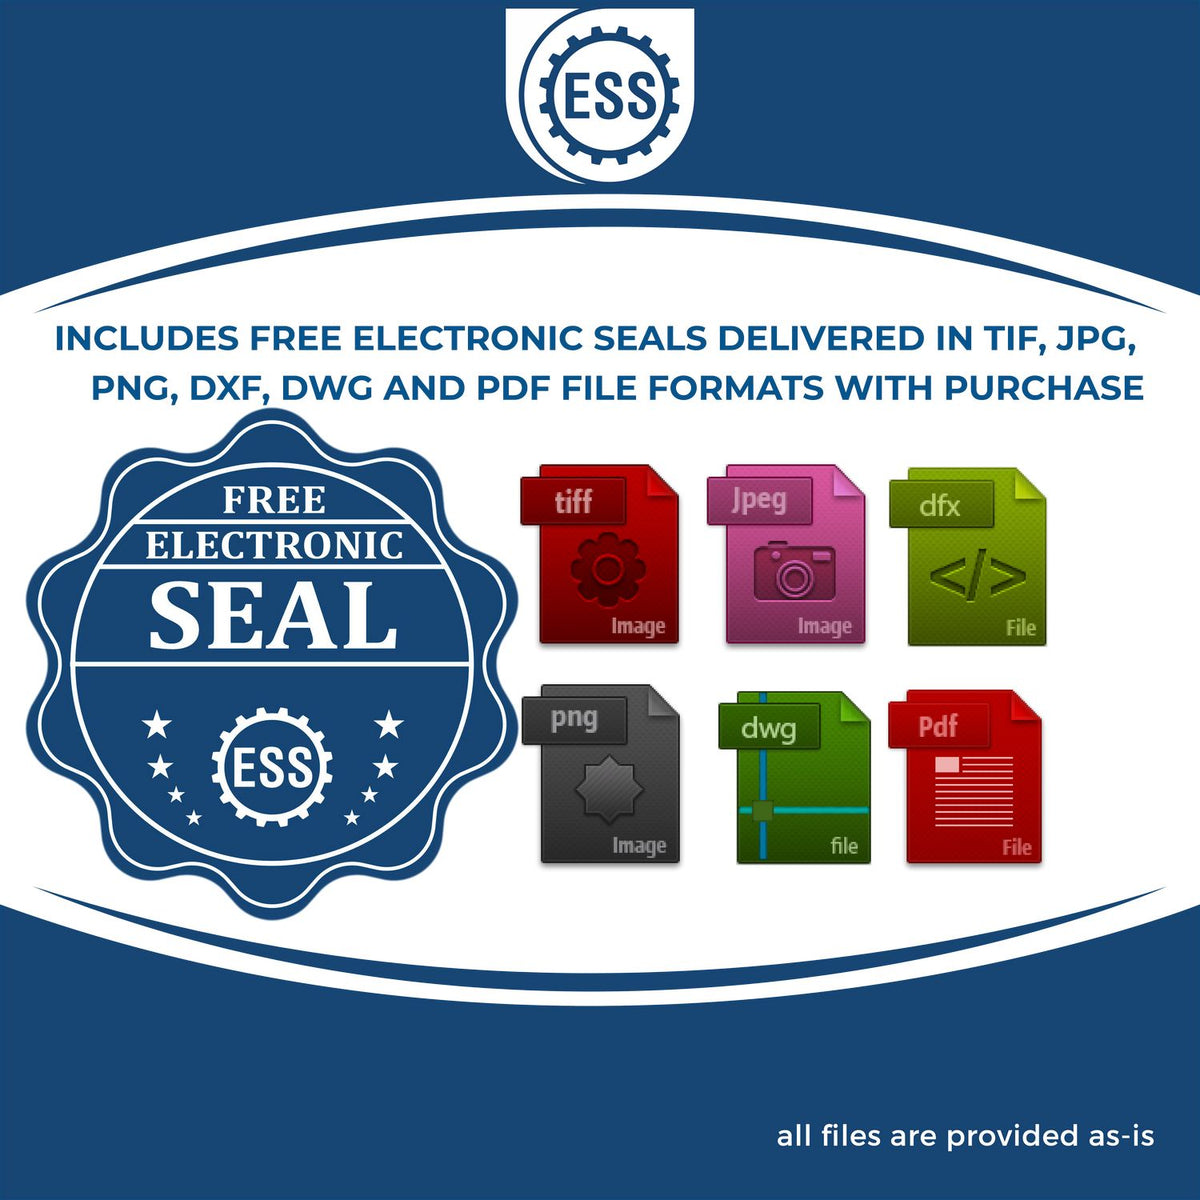 An infographic for the free electronic seal for the Hybrid Idaho Architect Seal illustrating the different file type icons such as DXF, DWG, TIF, JPG and PNG.